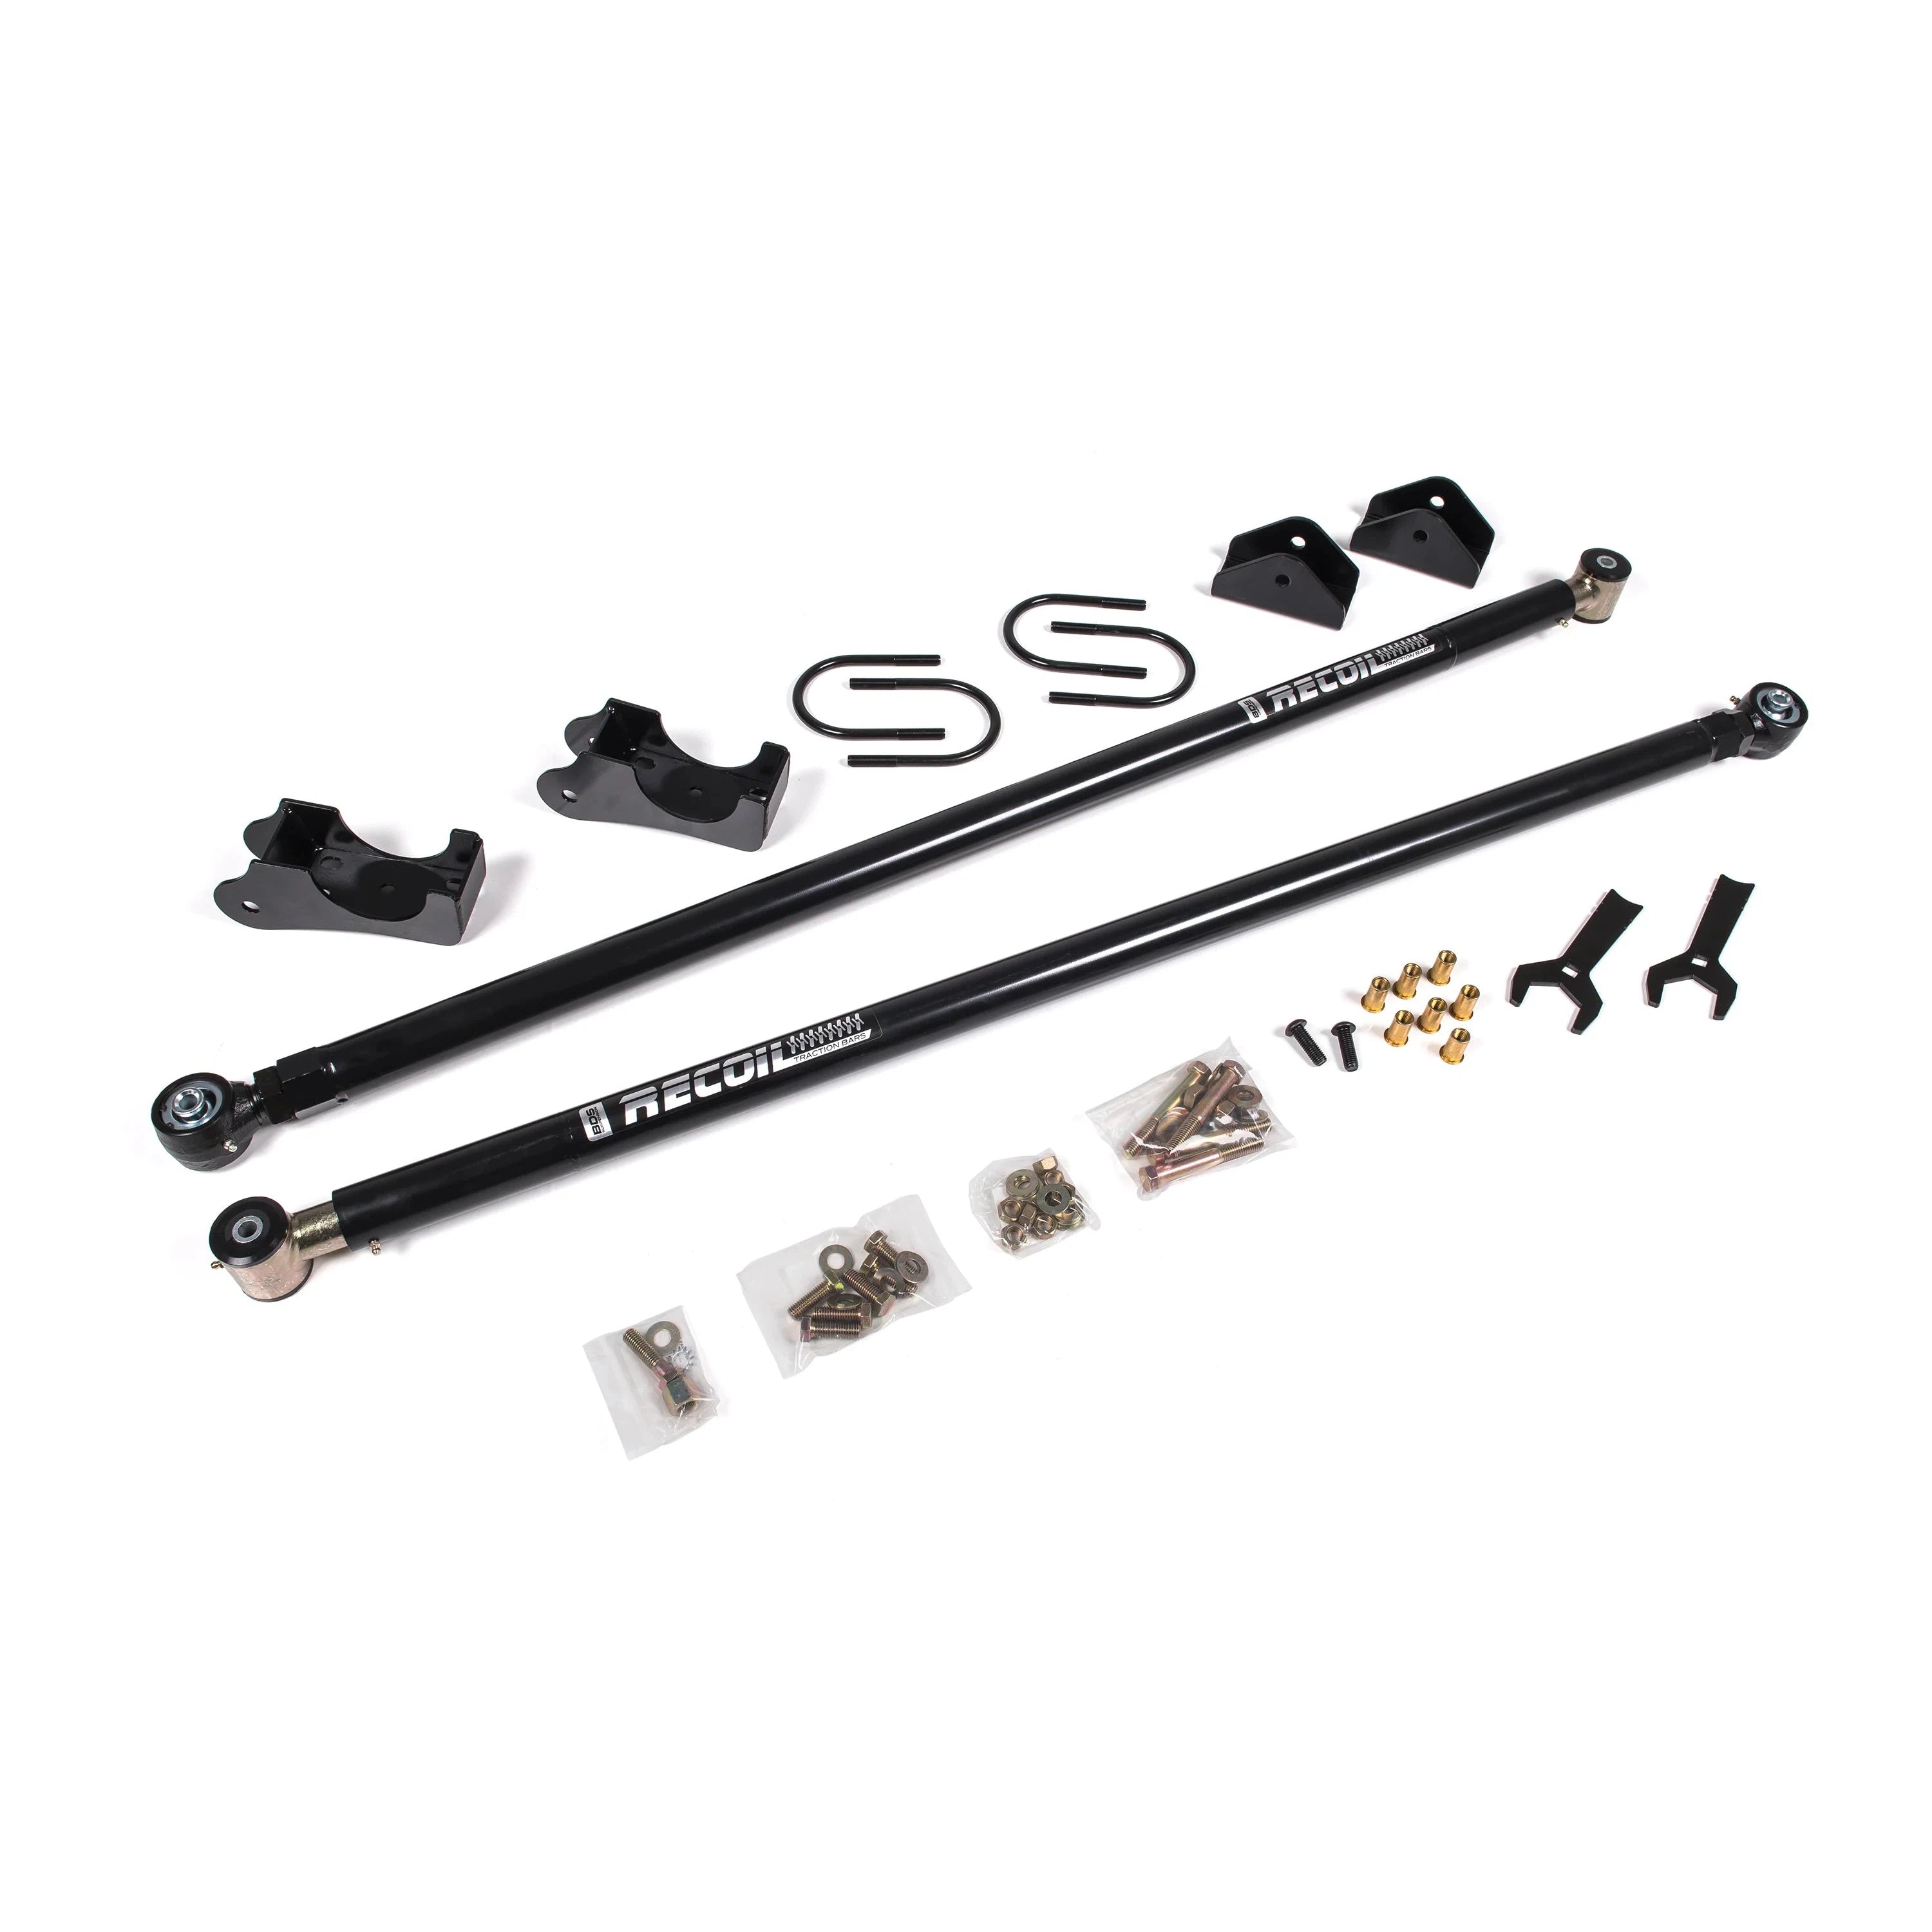 2009-2018 Cummins Recoil Traction Bar Kit (BDS2305)-Traction Bars-BDS-BDS2305-Dirty Diesel Customs